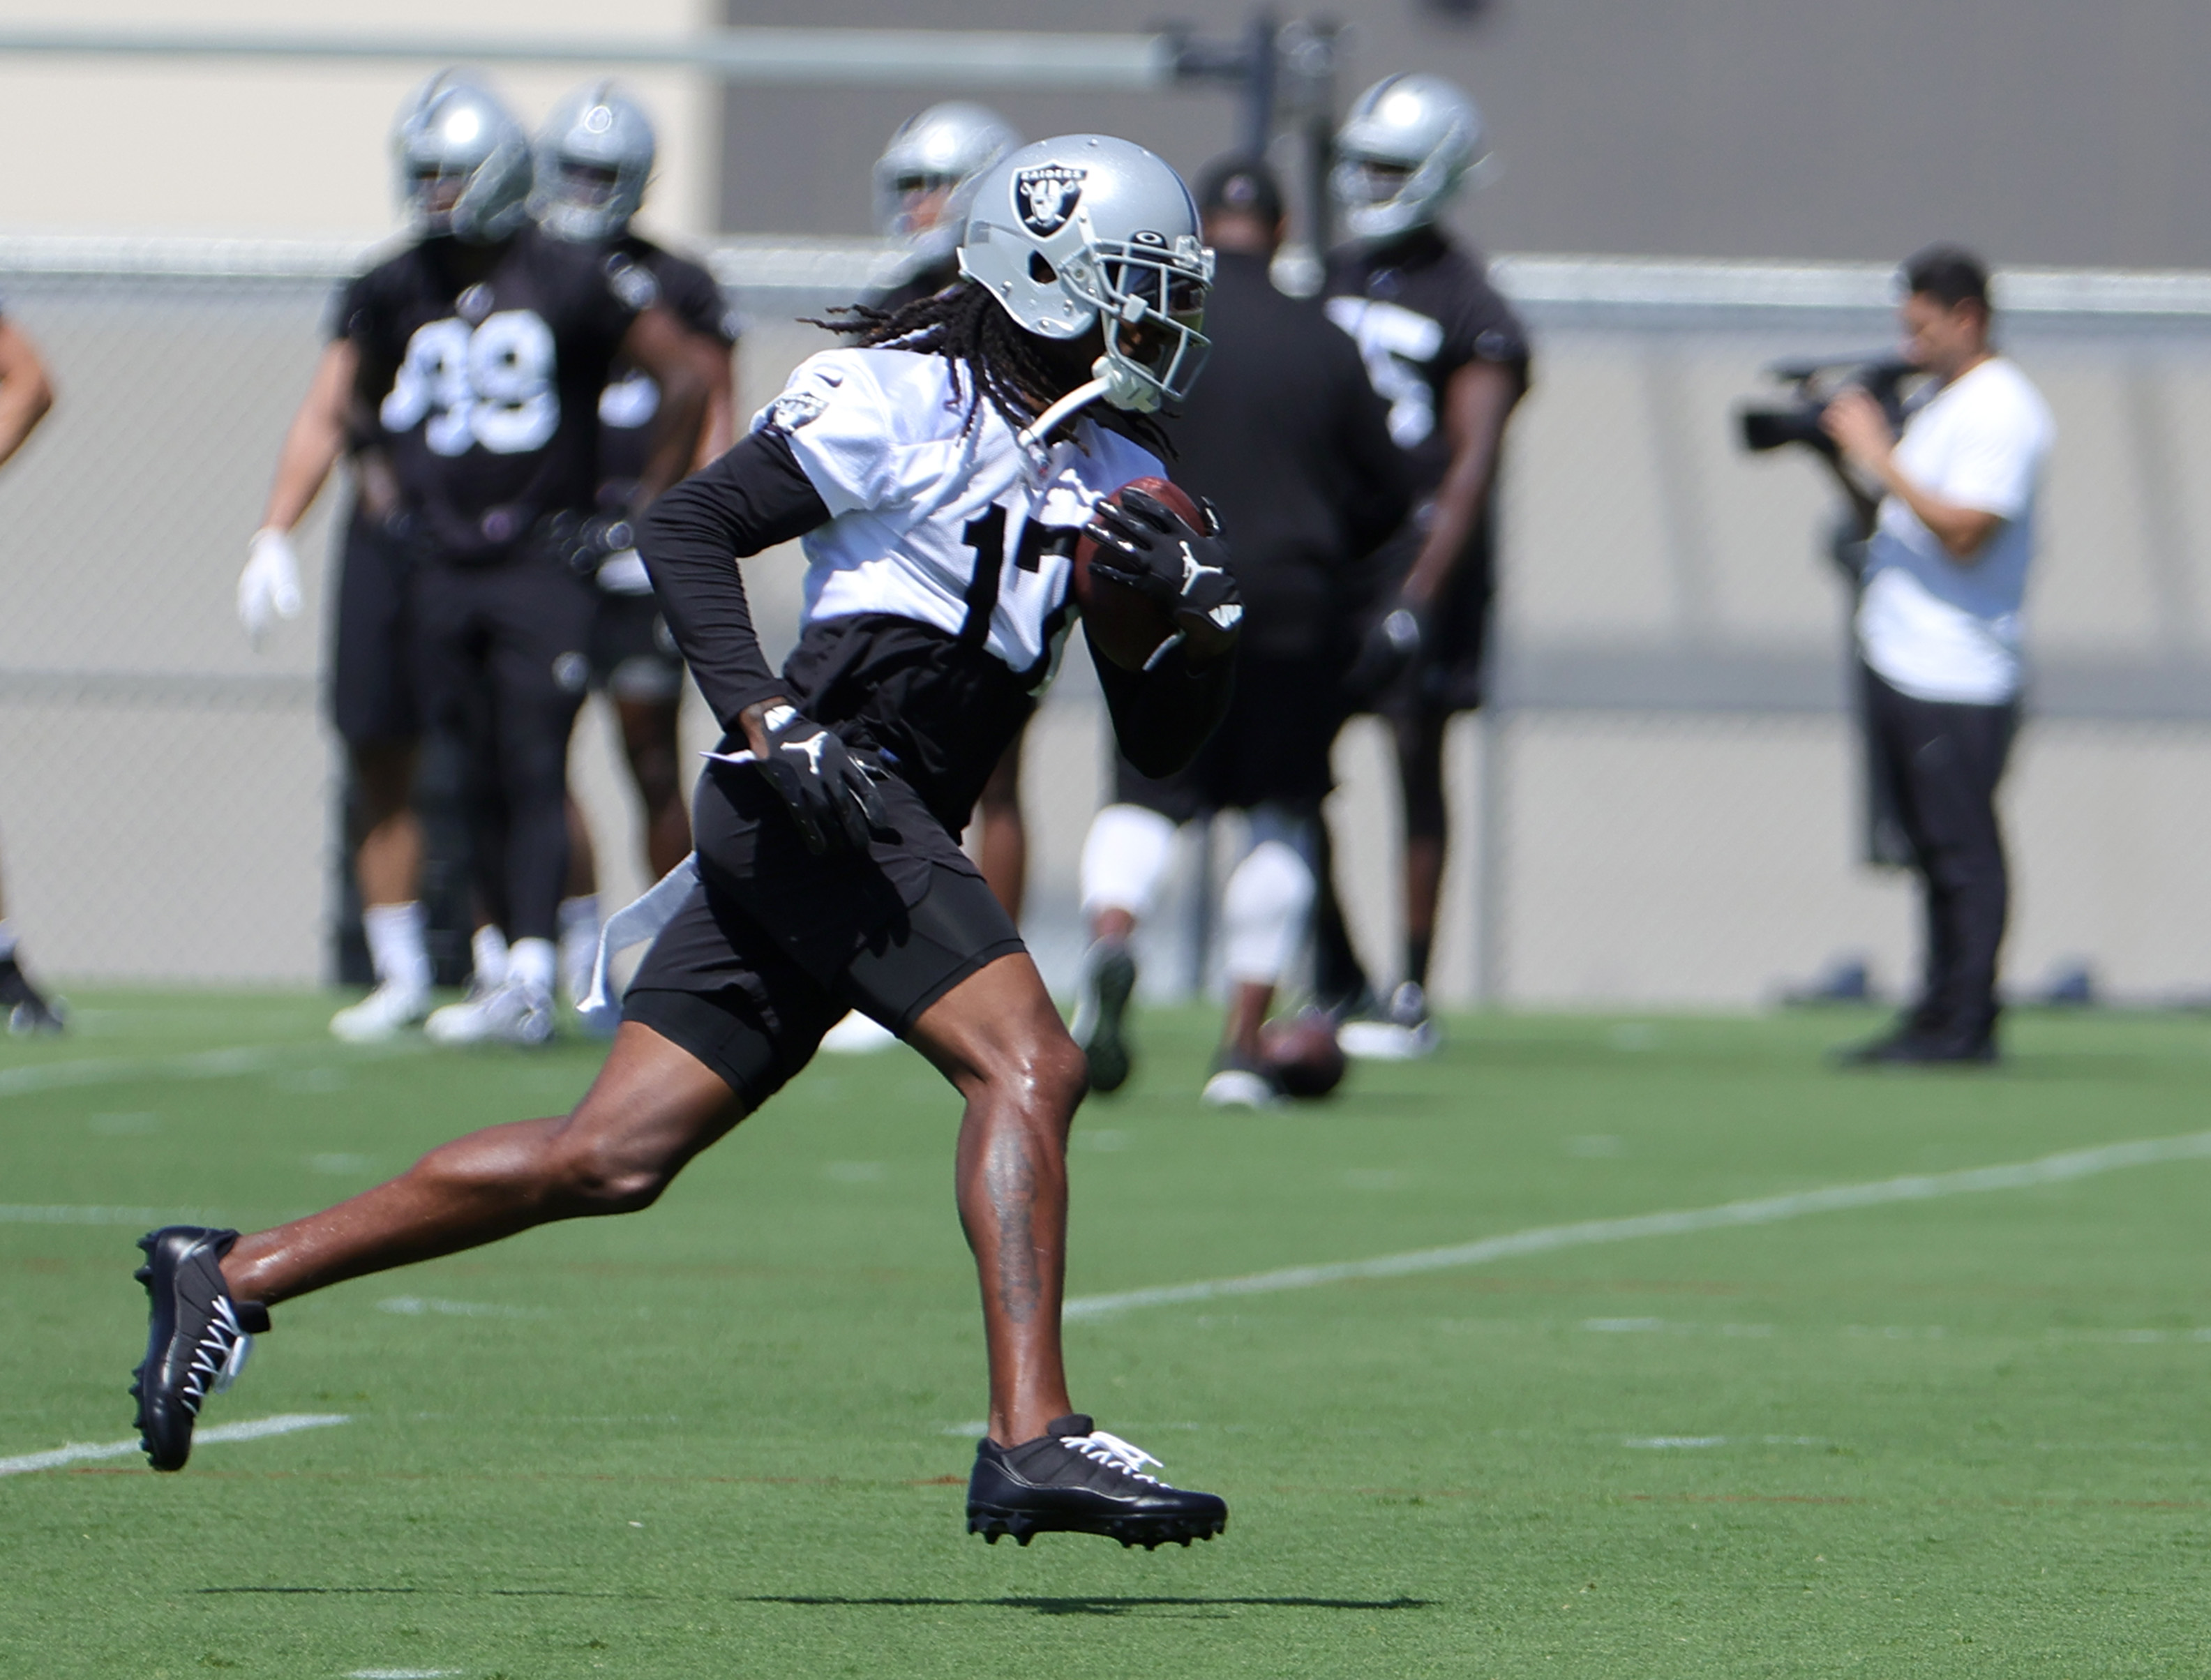 Wide receiver Davante Adams #17 of the Las Vegas Raiders runs with the ball during mandatory minicamp at the Las Vegas Raiders Headquarters/Intermountain Healthcare Performance Center on June 07, 2022 in Henderson, Nevada.